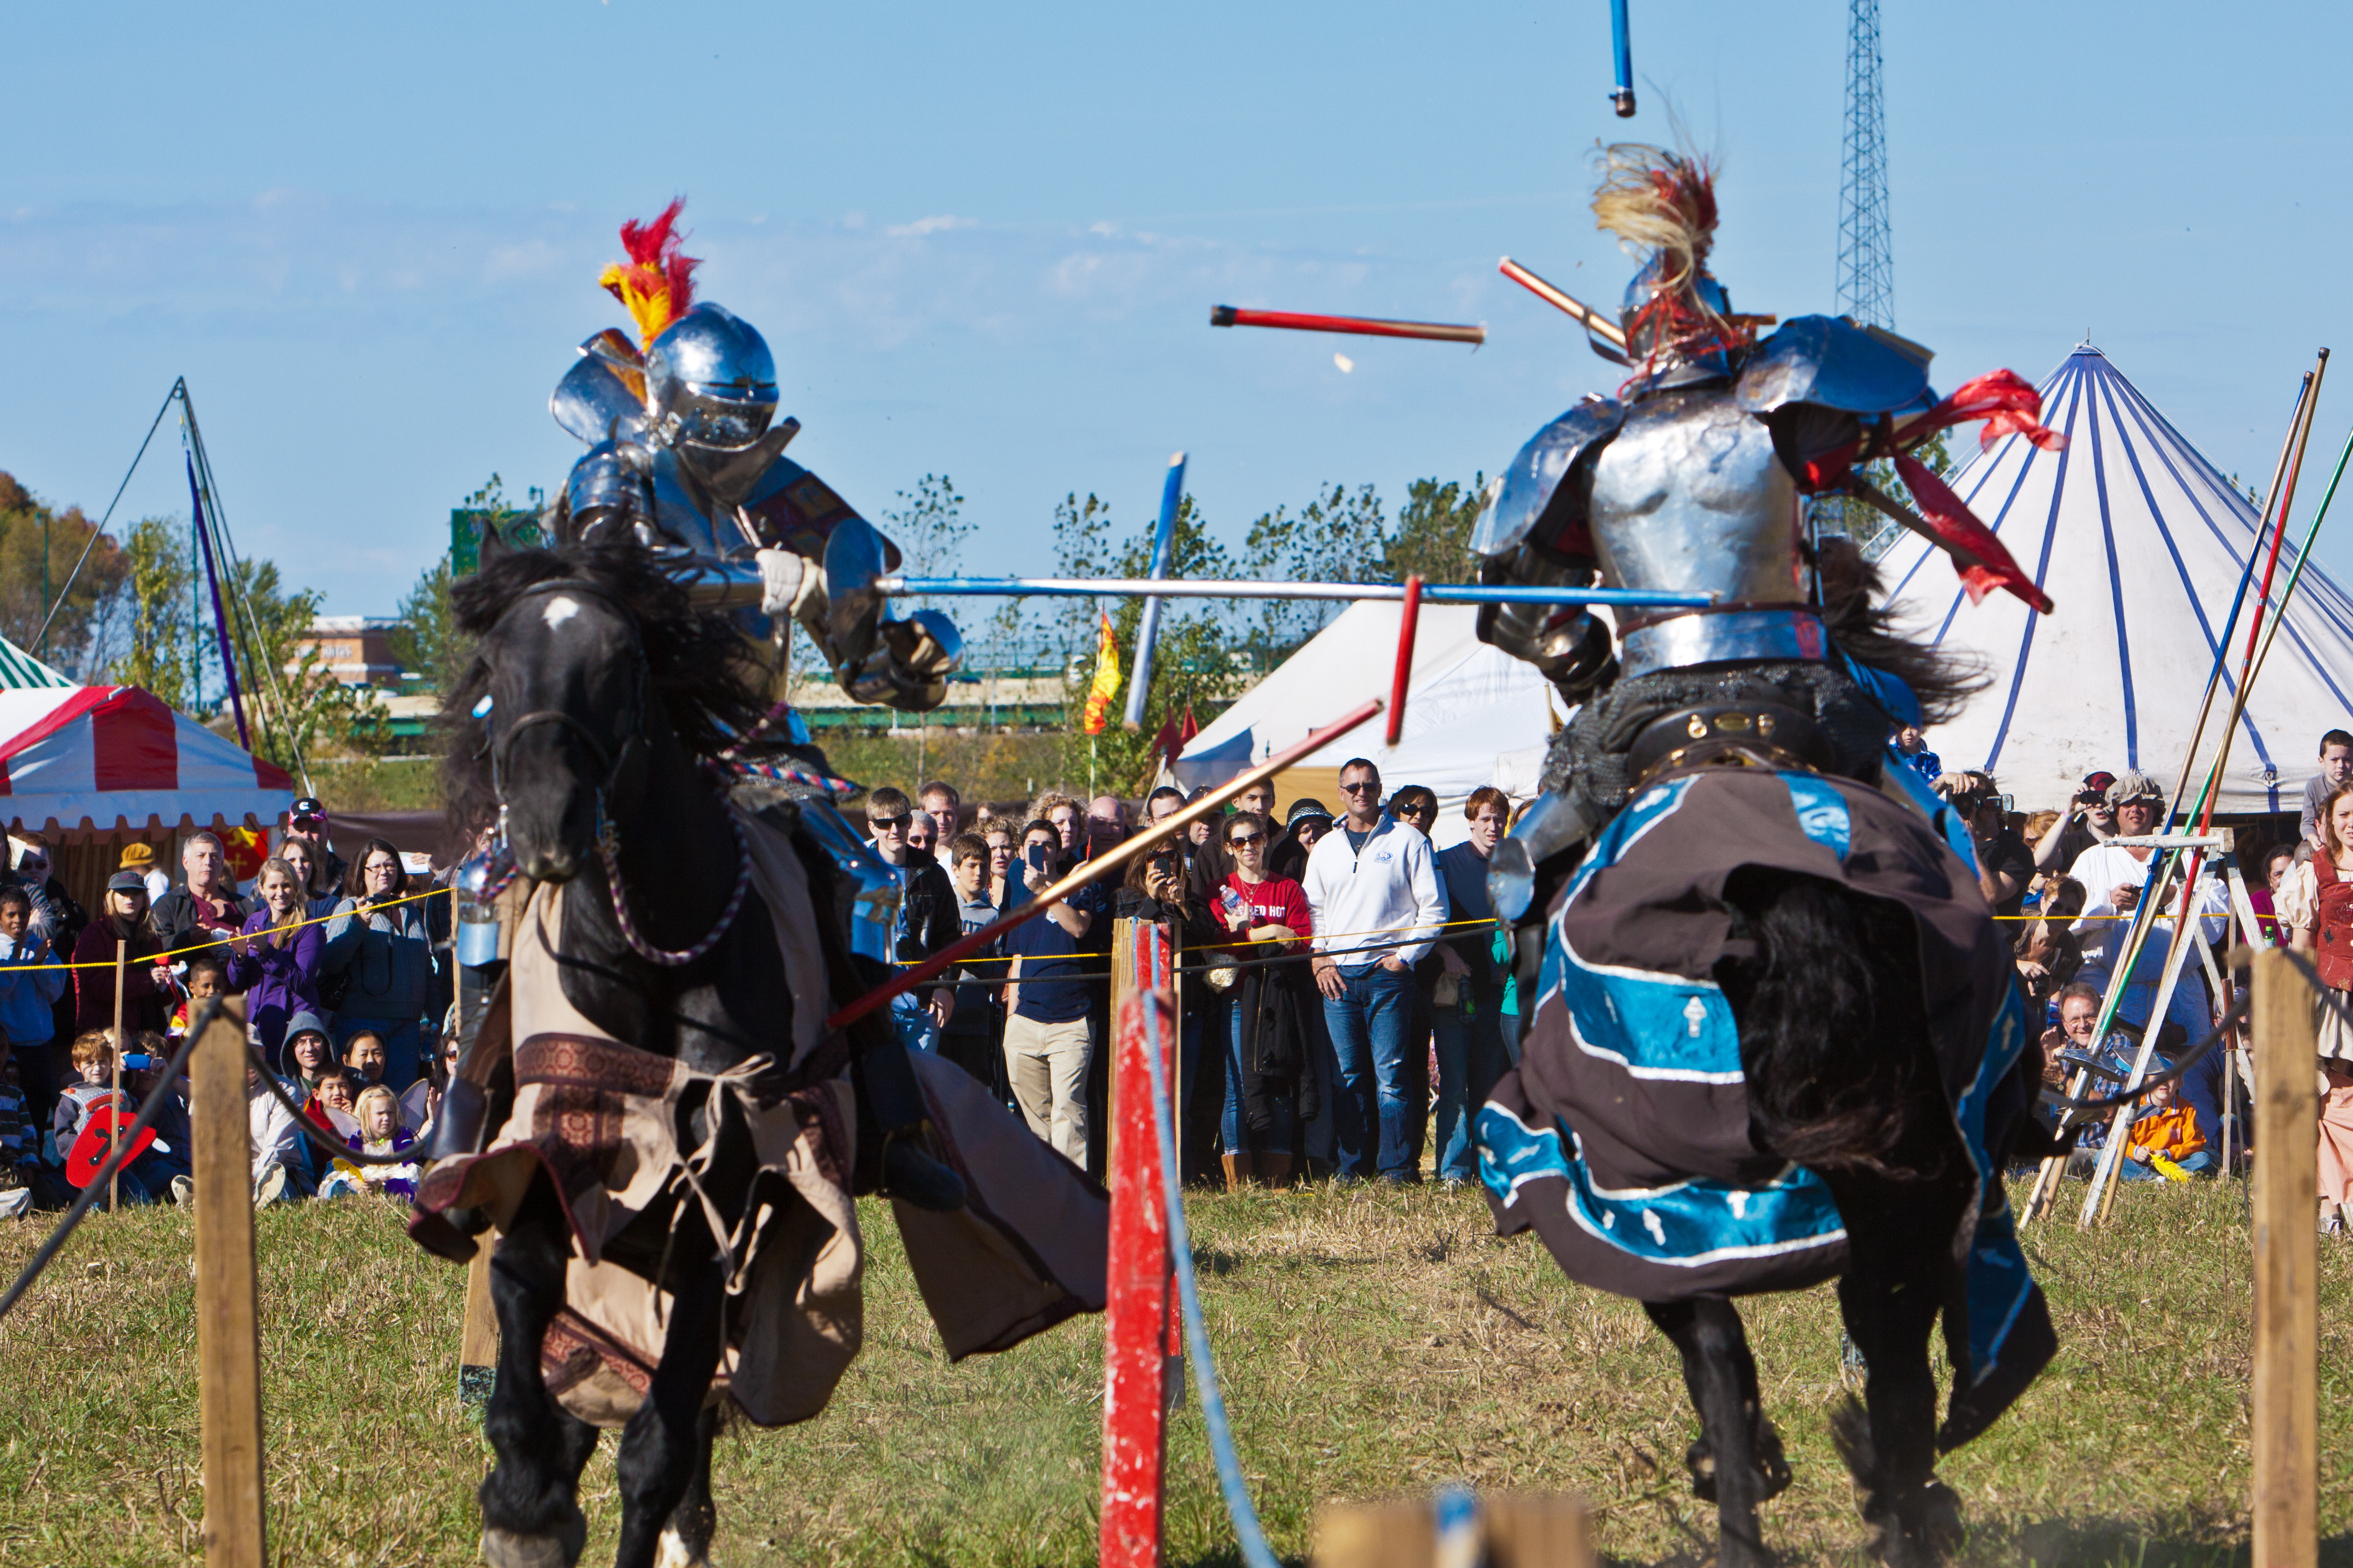 Jousting is one of the highlights of the two-day Renaissance Faire events held at Saxony Village at 131st Street and Olio Road to raise money for Sisters Cities of Fishers. (Submitted photo)